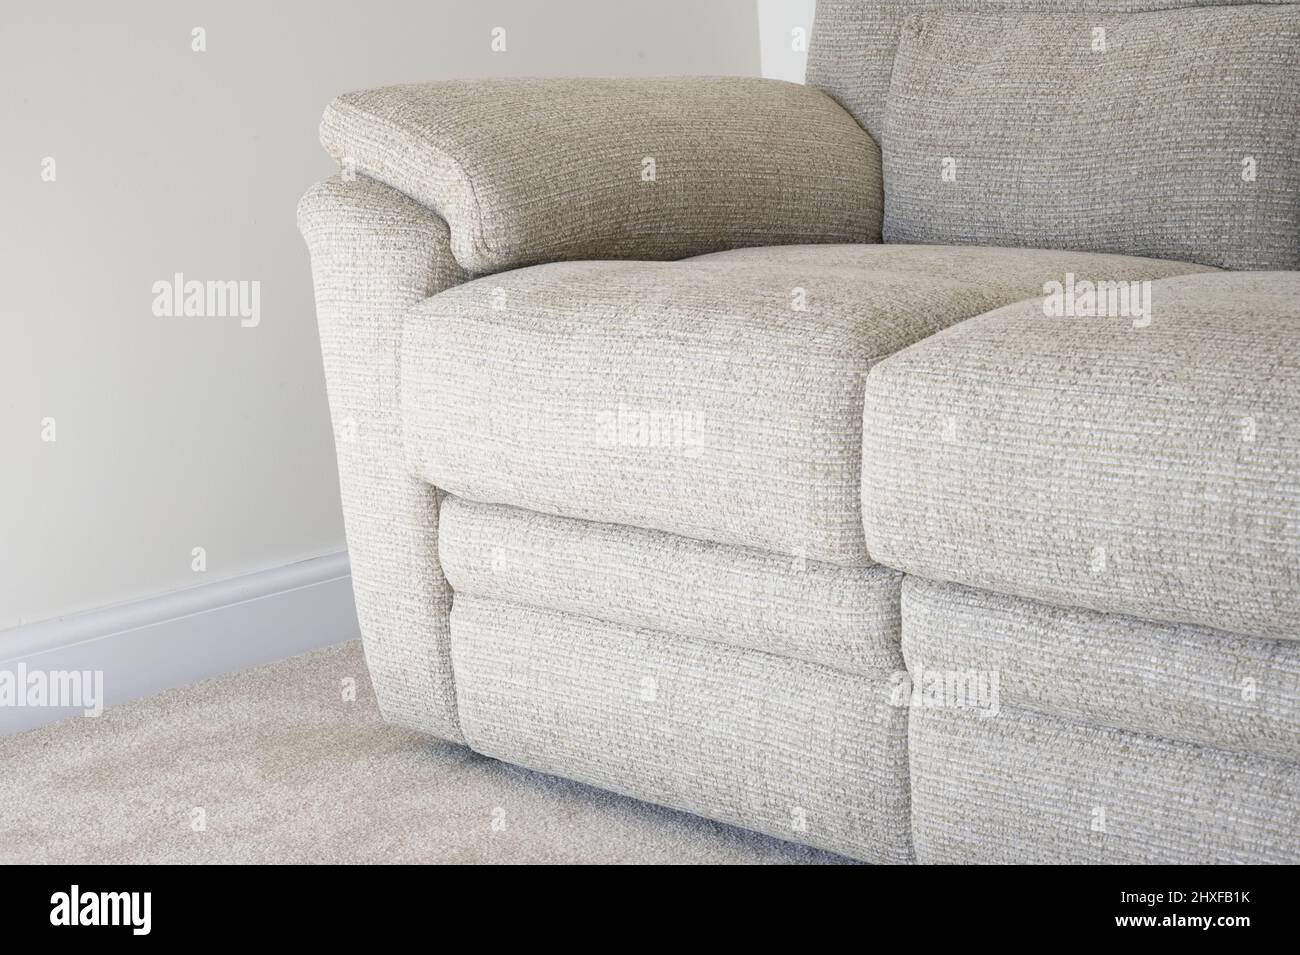 Neutral colour home interior showing sofa and carpet Stock Photo